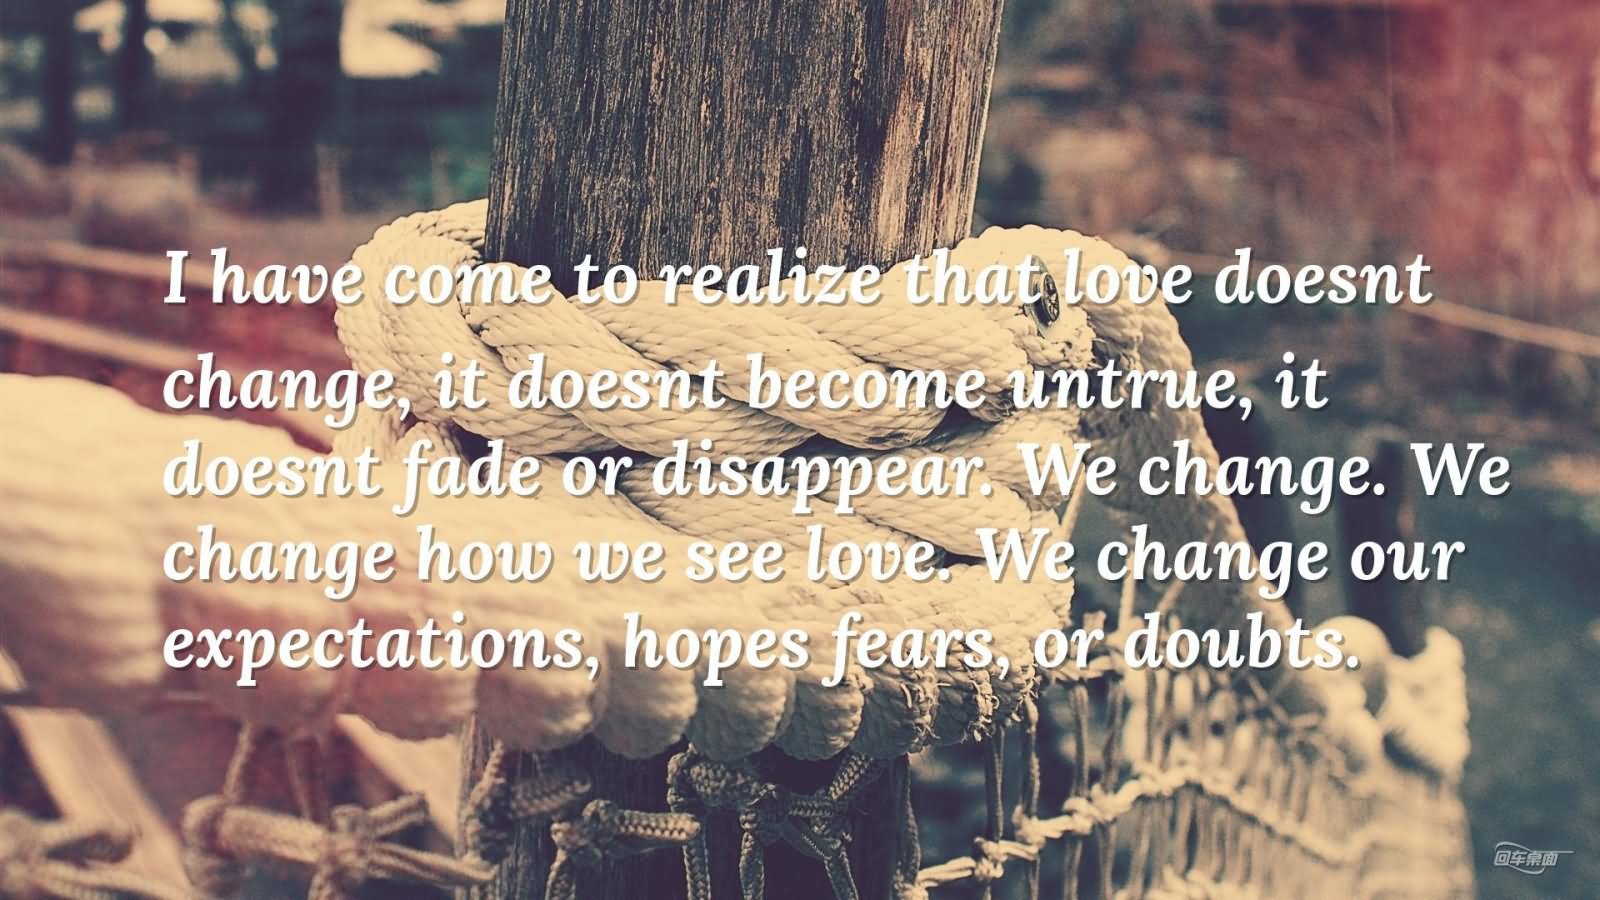 I have come to realize that love doesn’t change, it doesn’t become untrue, it doesn’t fade or disappear. We change. We change how we see love. We change our expectations, hopes fears, or doubts.